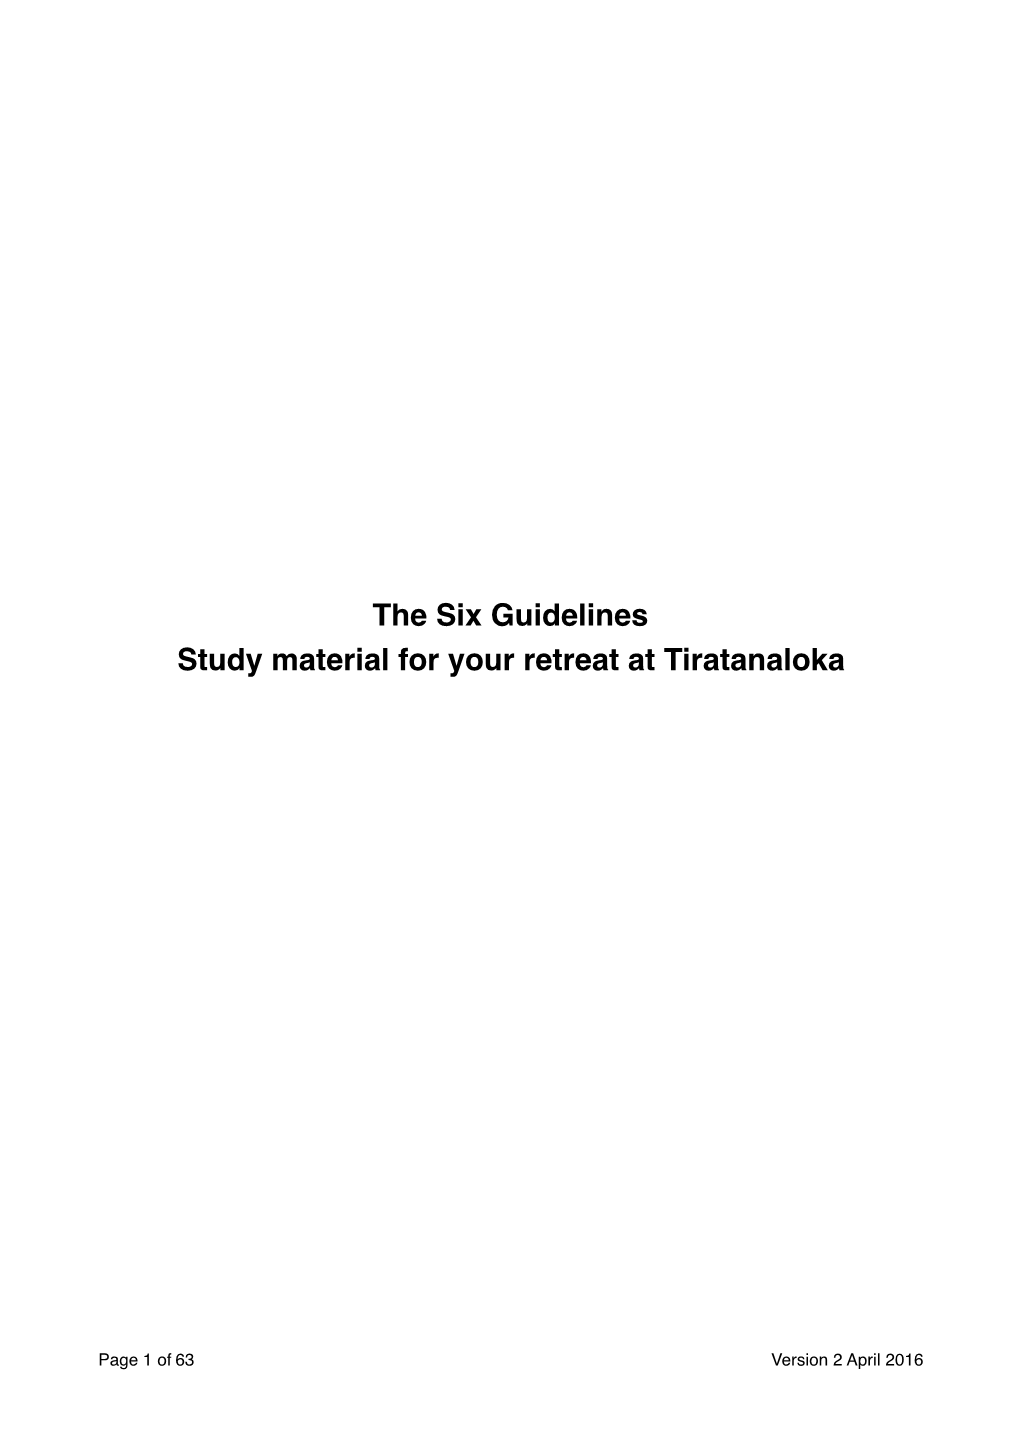 The Six Guidelines Study Material for Your Retreat at Tiratanaloka